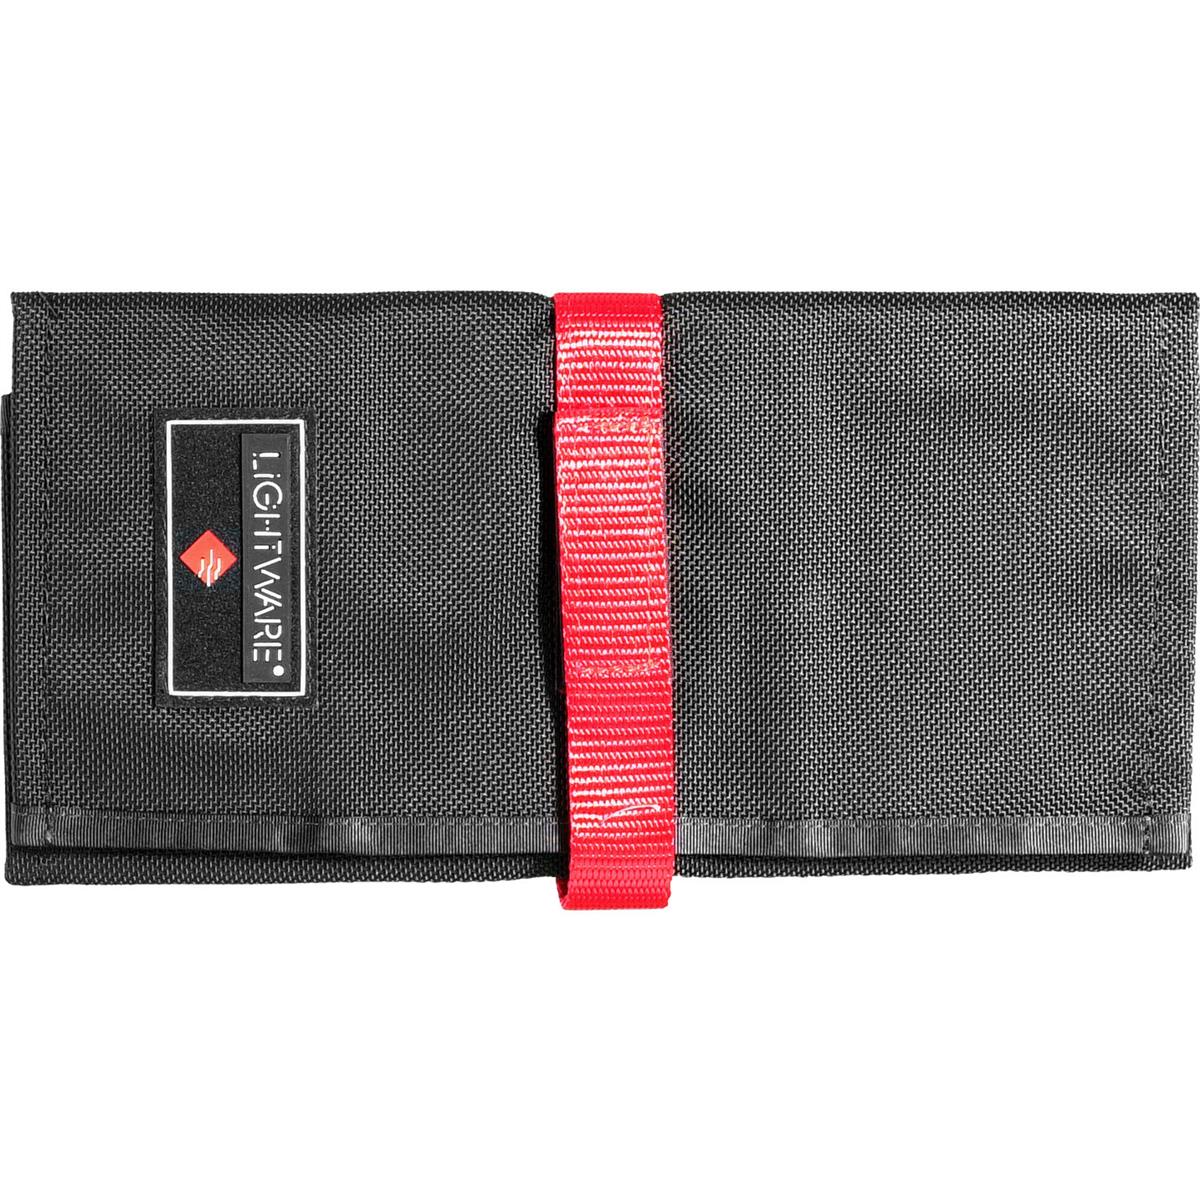 Image of Lightware Ticket Zip Wallet Tri-fold Travel Wallet with Many Pockets